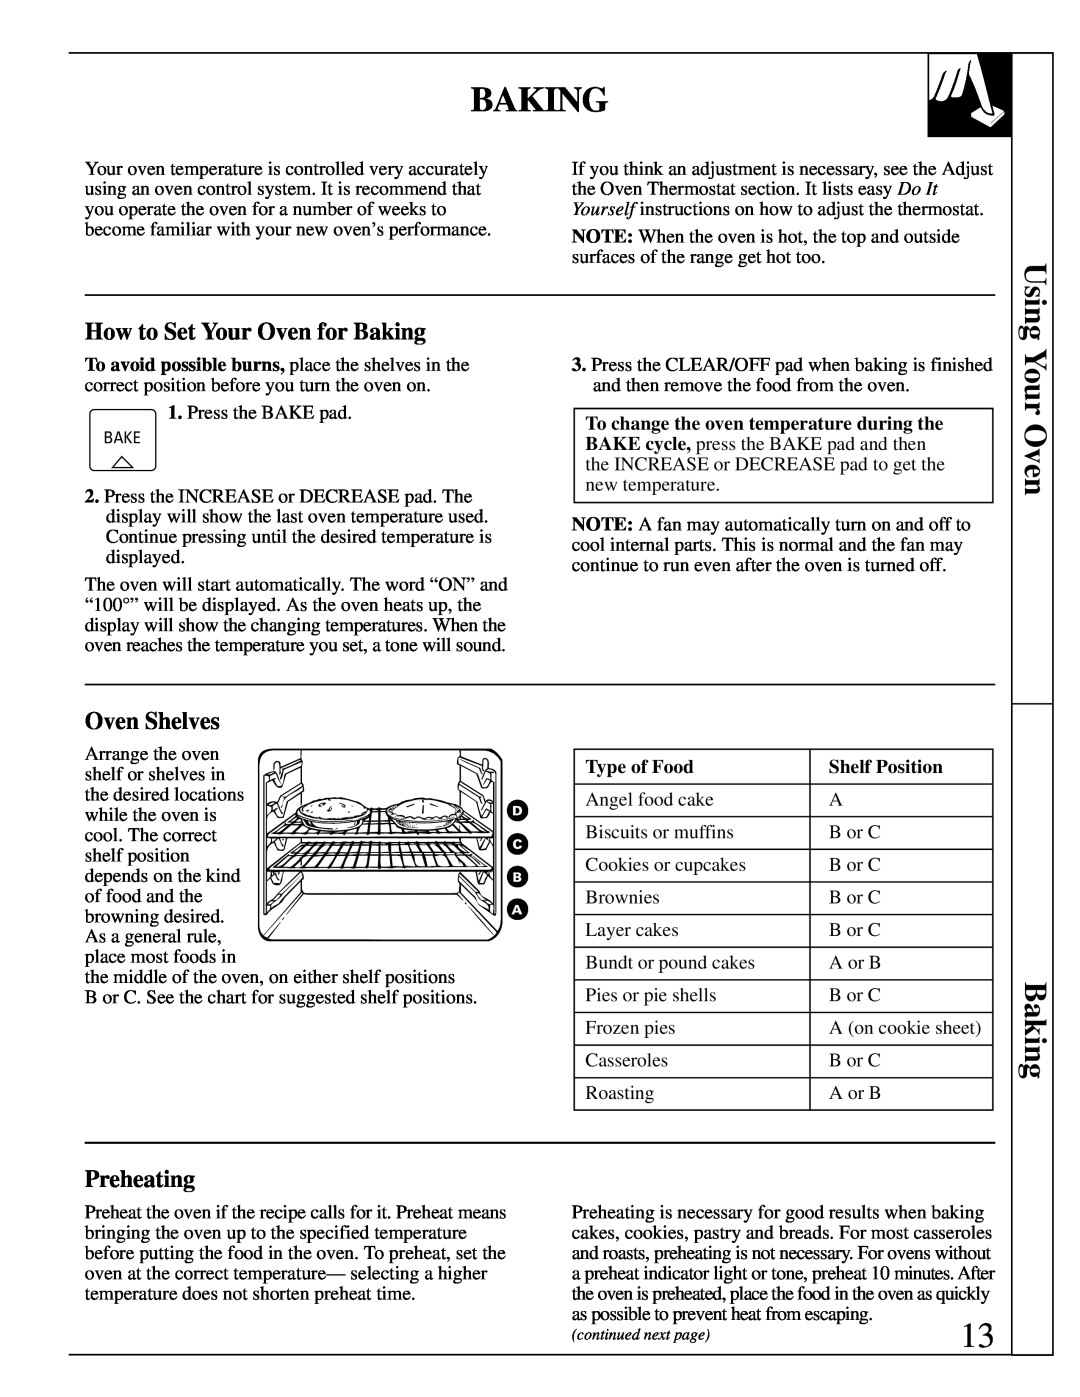 GE JDP36, JDP37 manual Using Your Oven, How to Set Your Oven for Baking, Preheating, Oven Shelves 